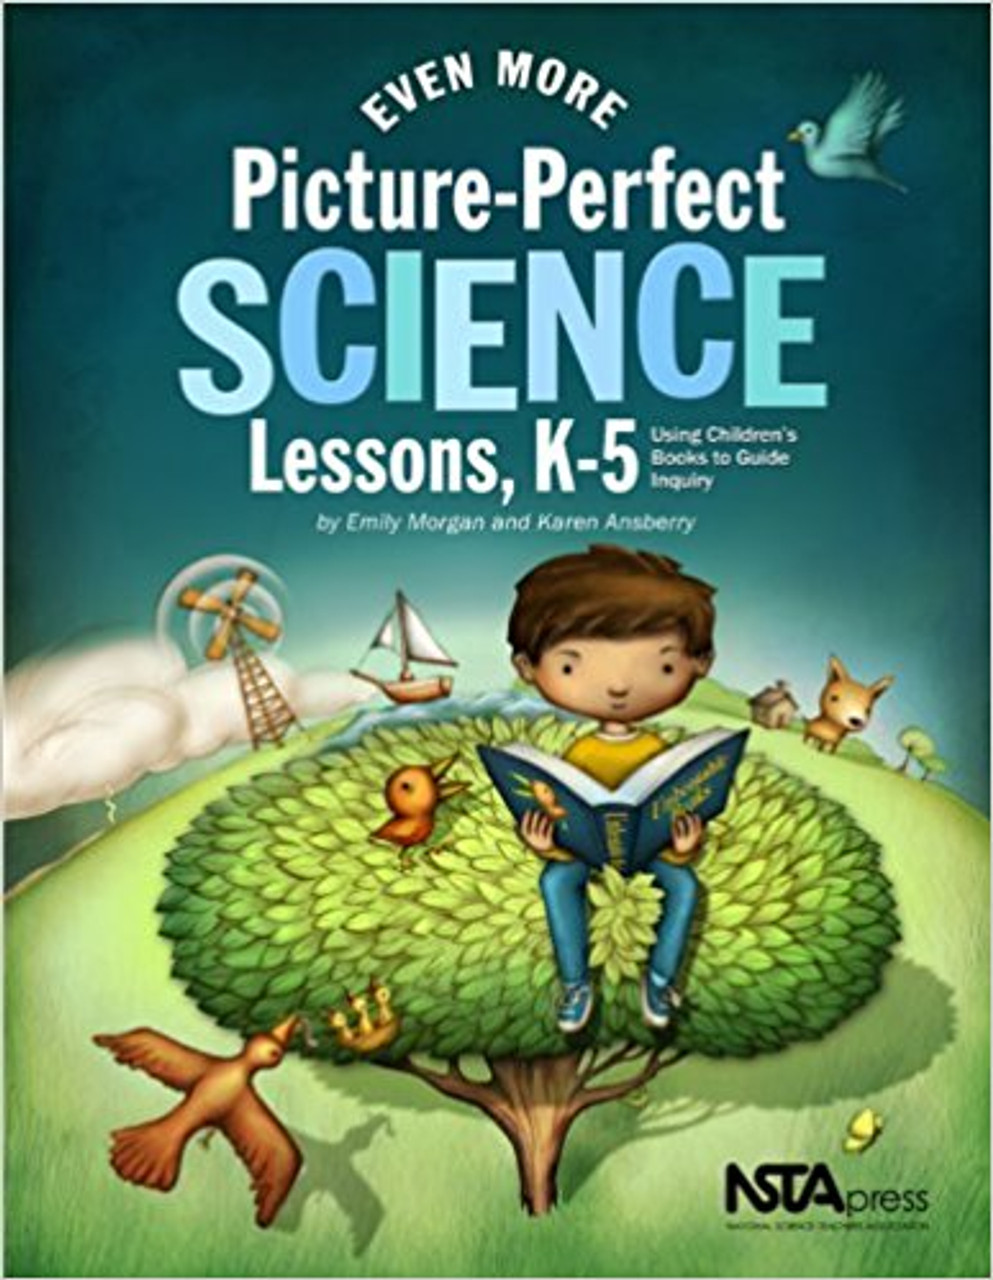 Picture-Perfect Science Lessons: Using Children's Books to Guide Inquiry, Grades 3-6 by Karen Ansberry